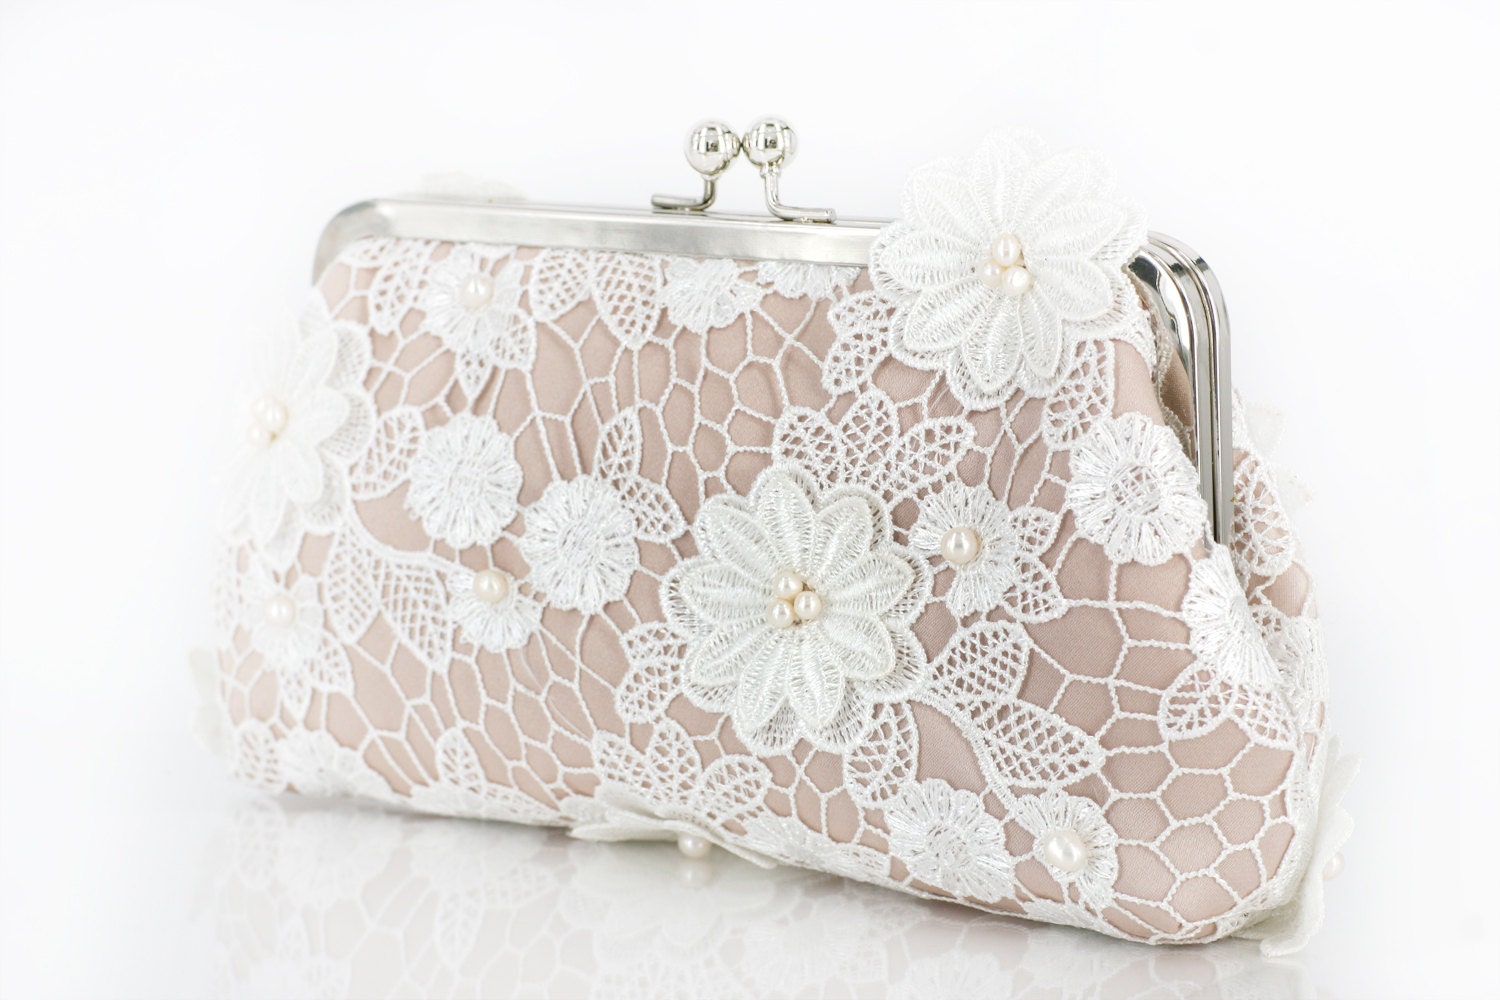 Ivory Bridal Lace Clutch with Freshwater Pearls in Ivory and Champagne 8-inch JARDIN2 - ANGEEW